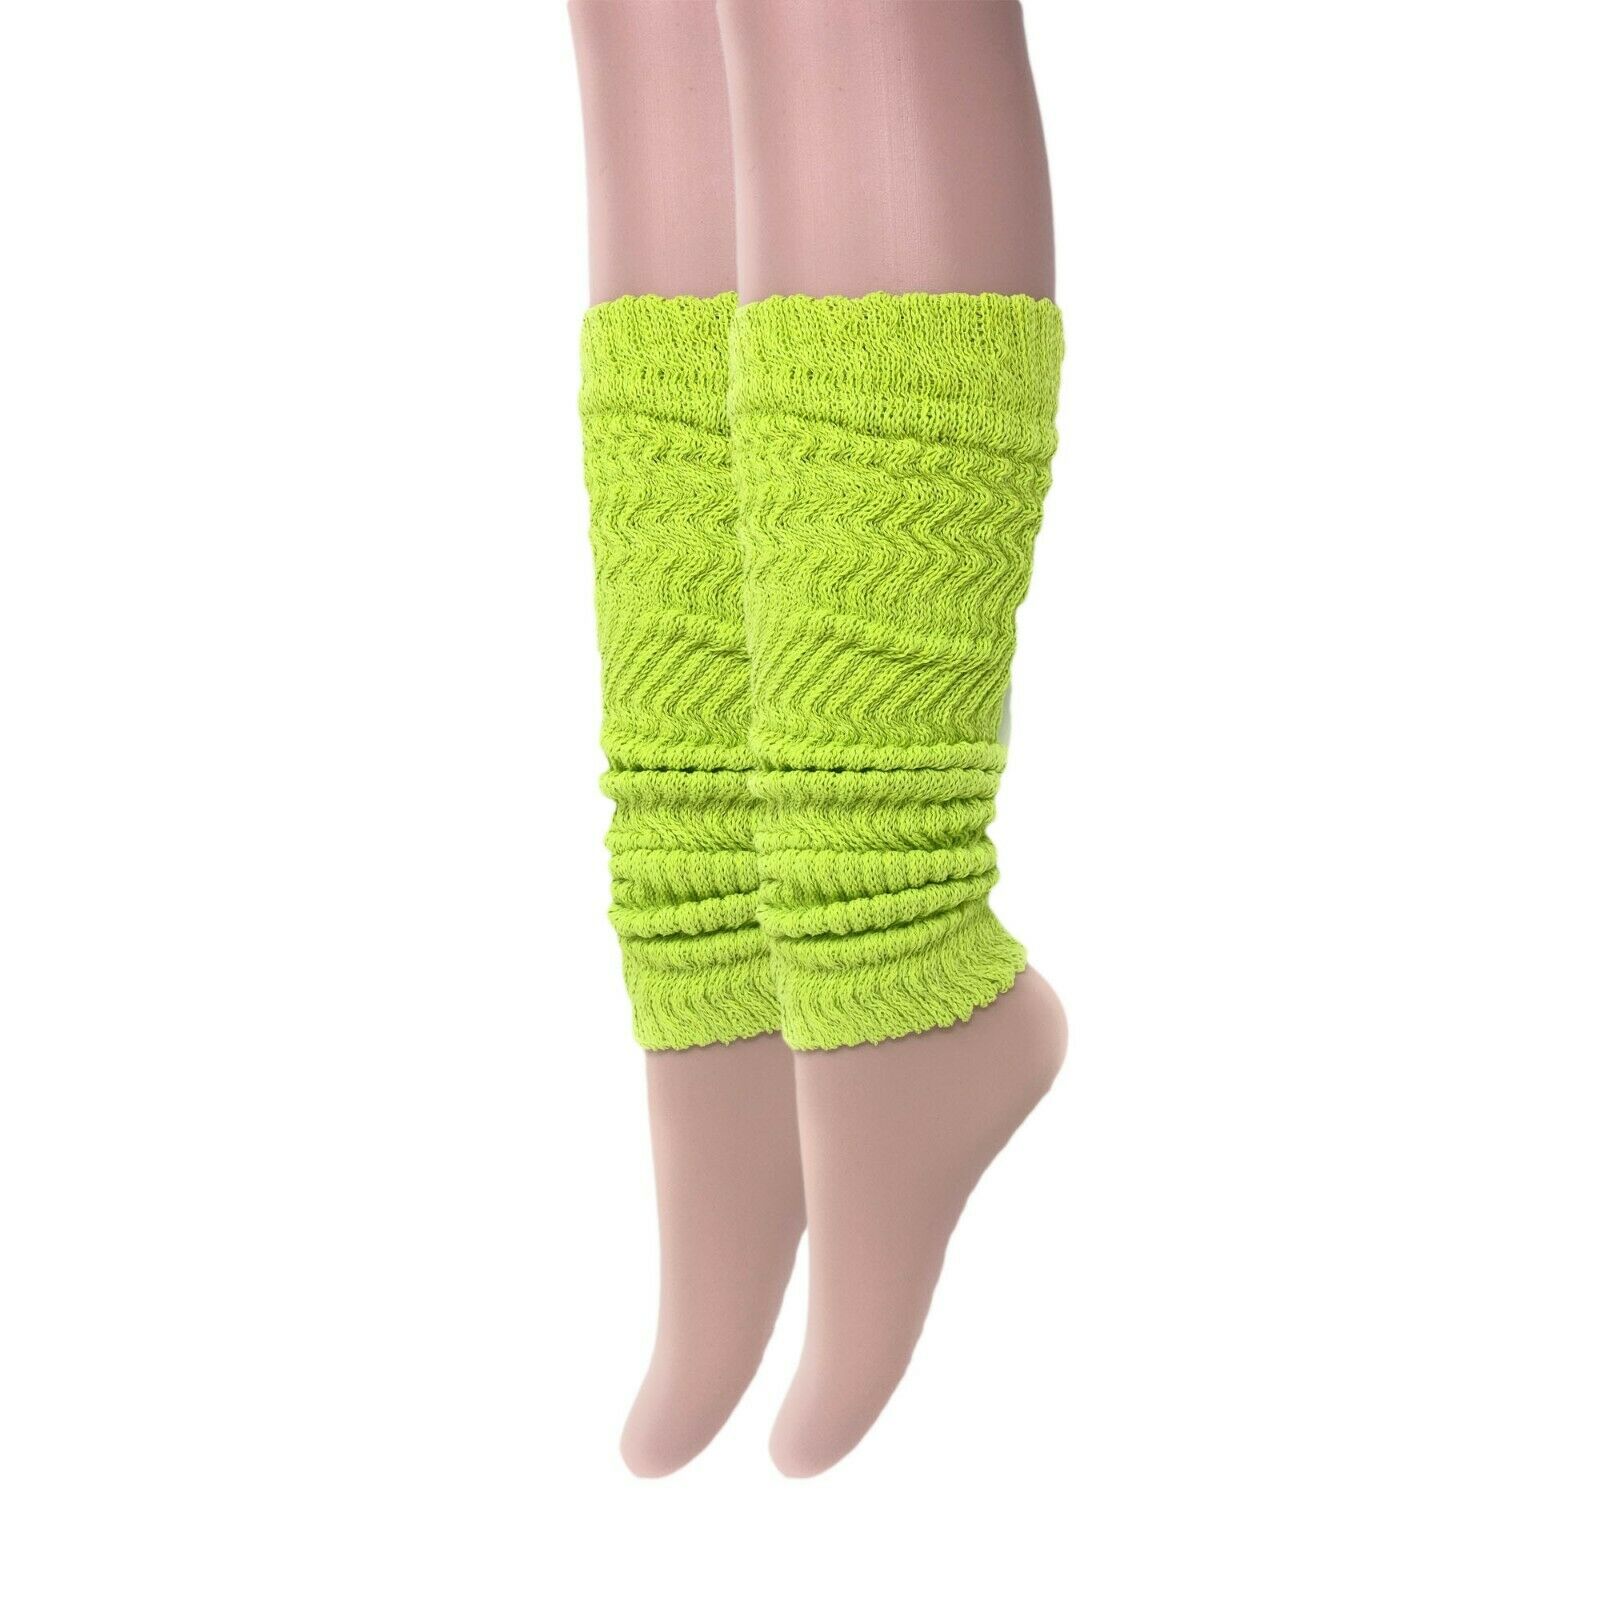 Cotton Leg Warmers For Women 1 Pair Cotton Knitted Retro